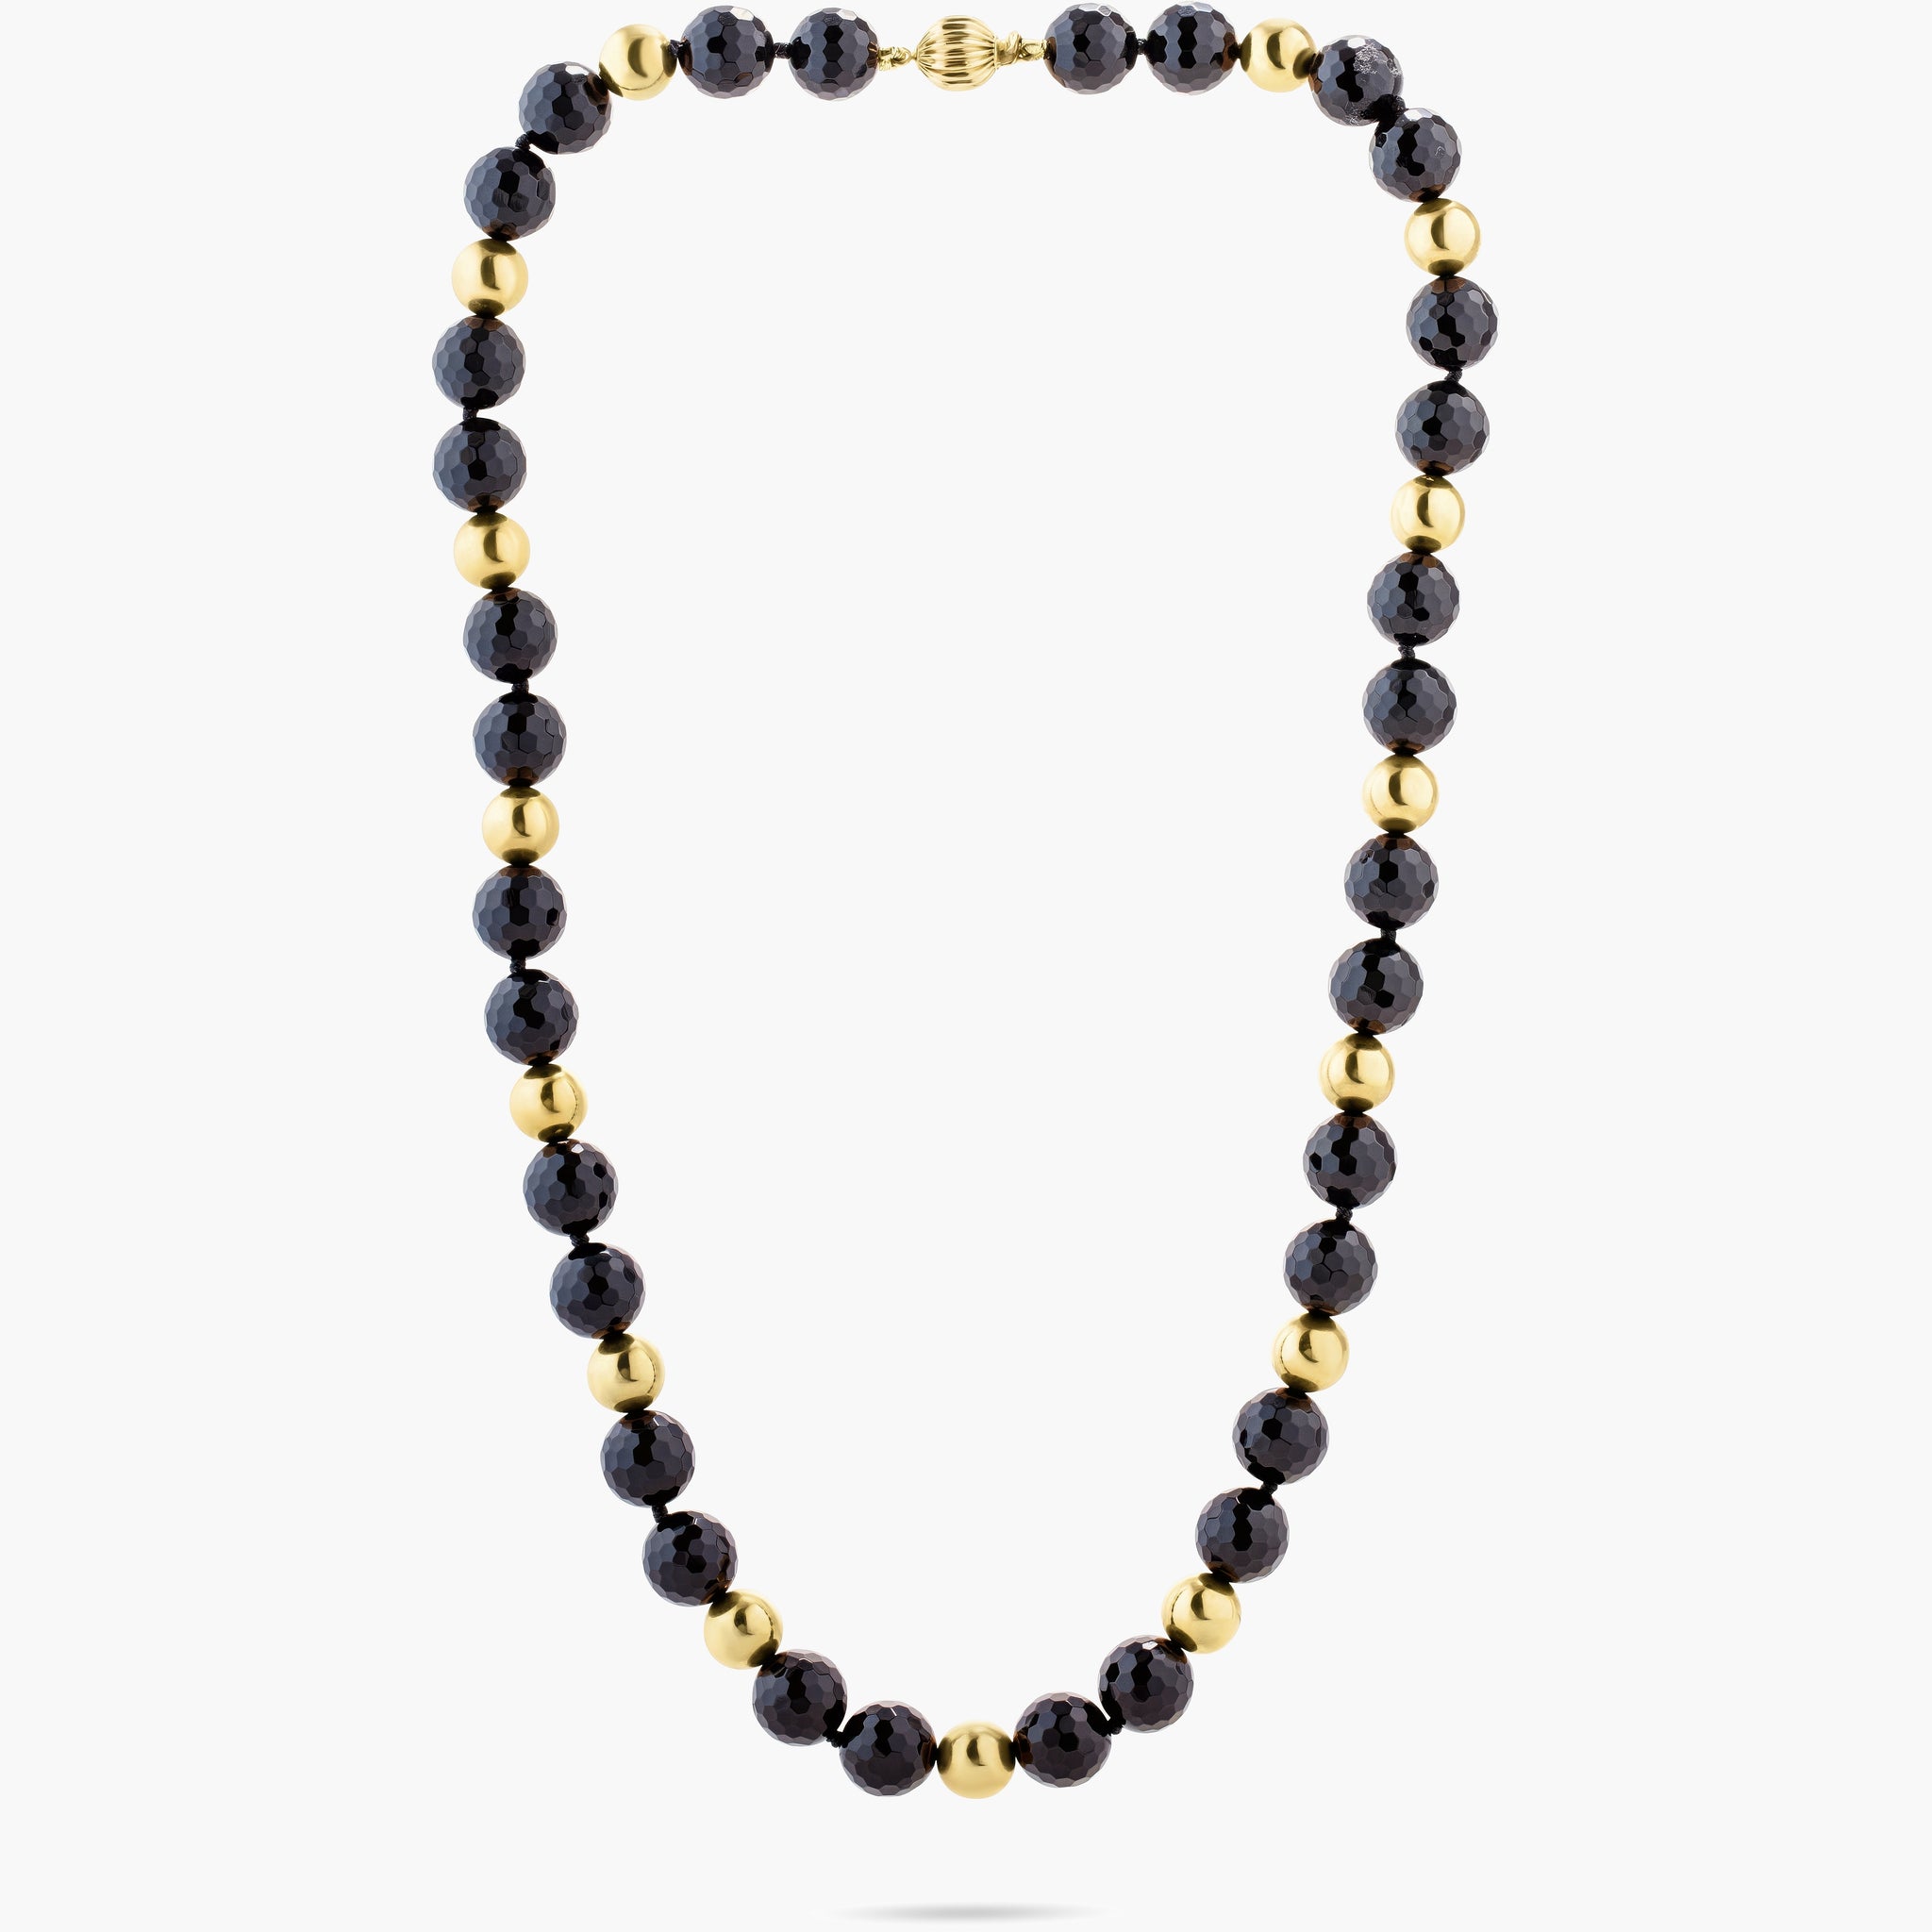 Onyx & gold bead necklace